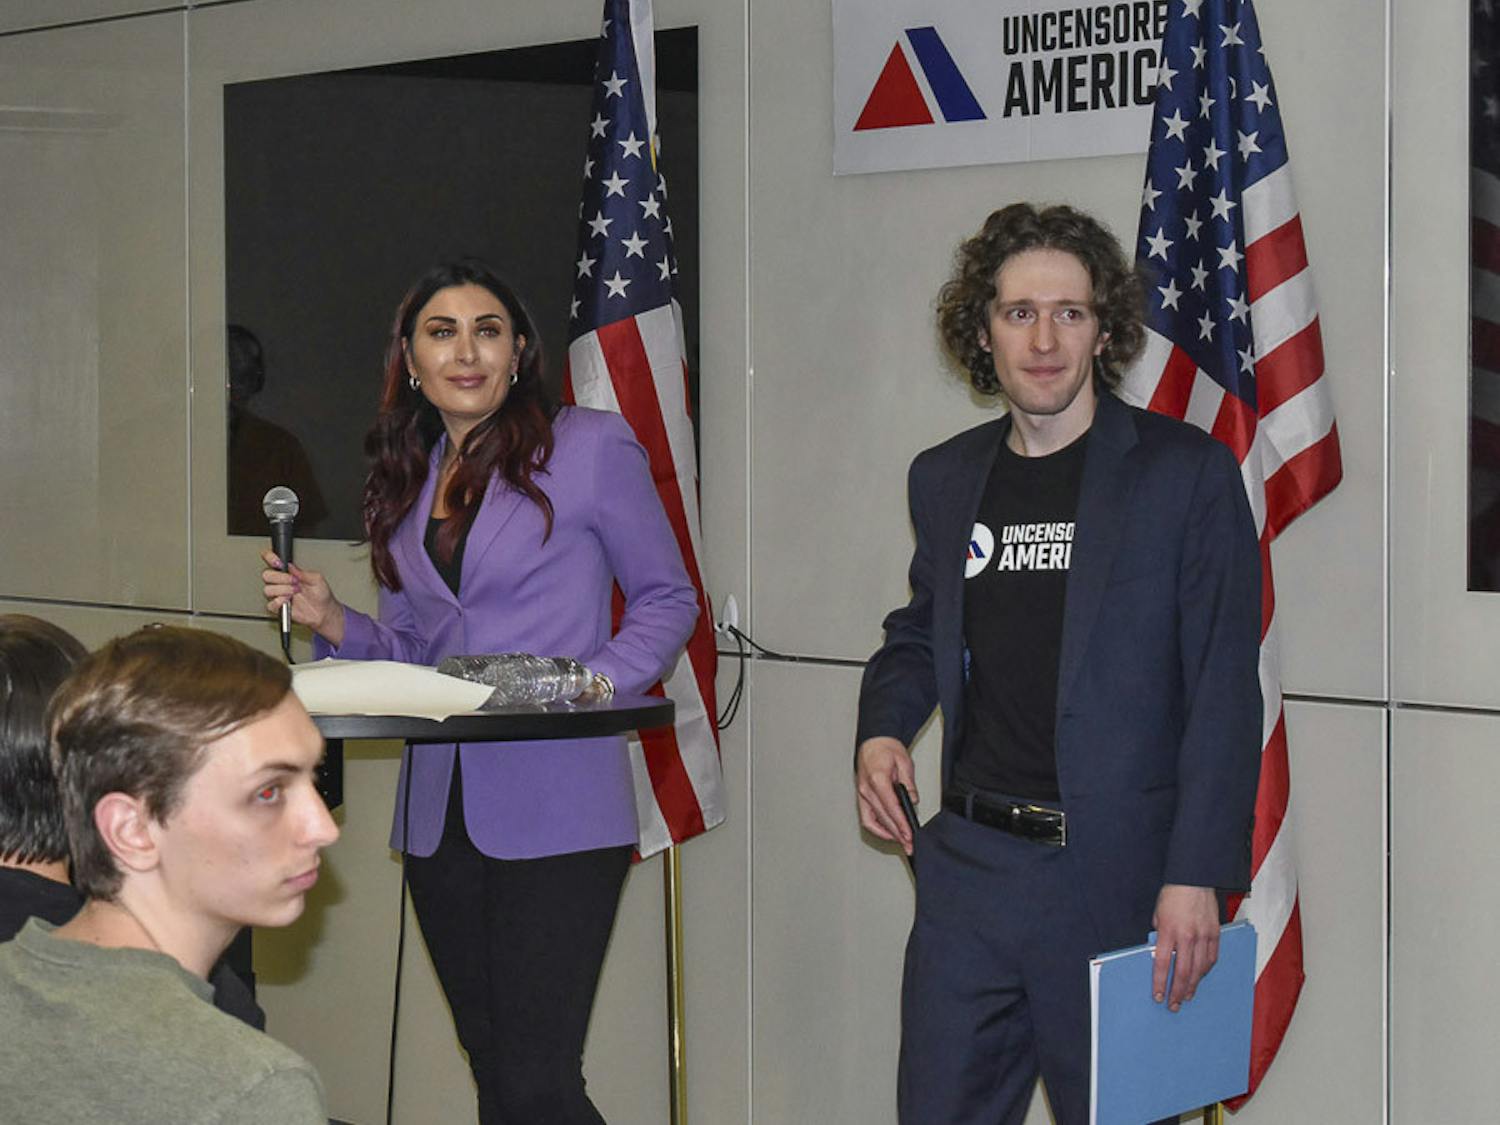 A photo of Conservative activist Laura Loomer (left) and founder of Uncensored America Sean Semanko (right) at Loomer’s speaking event in Russell House on April 18, 2023.